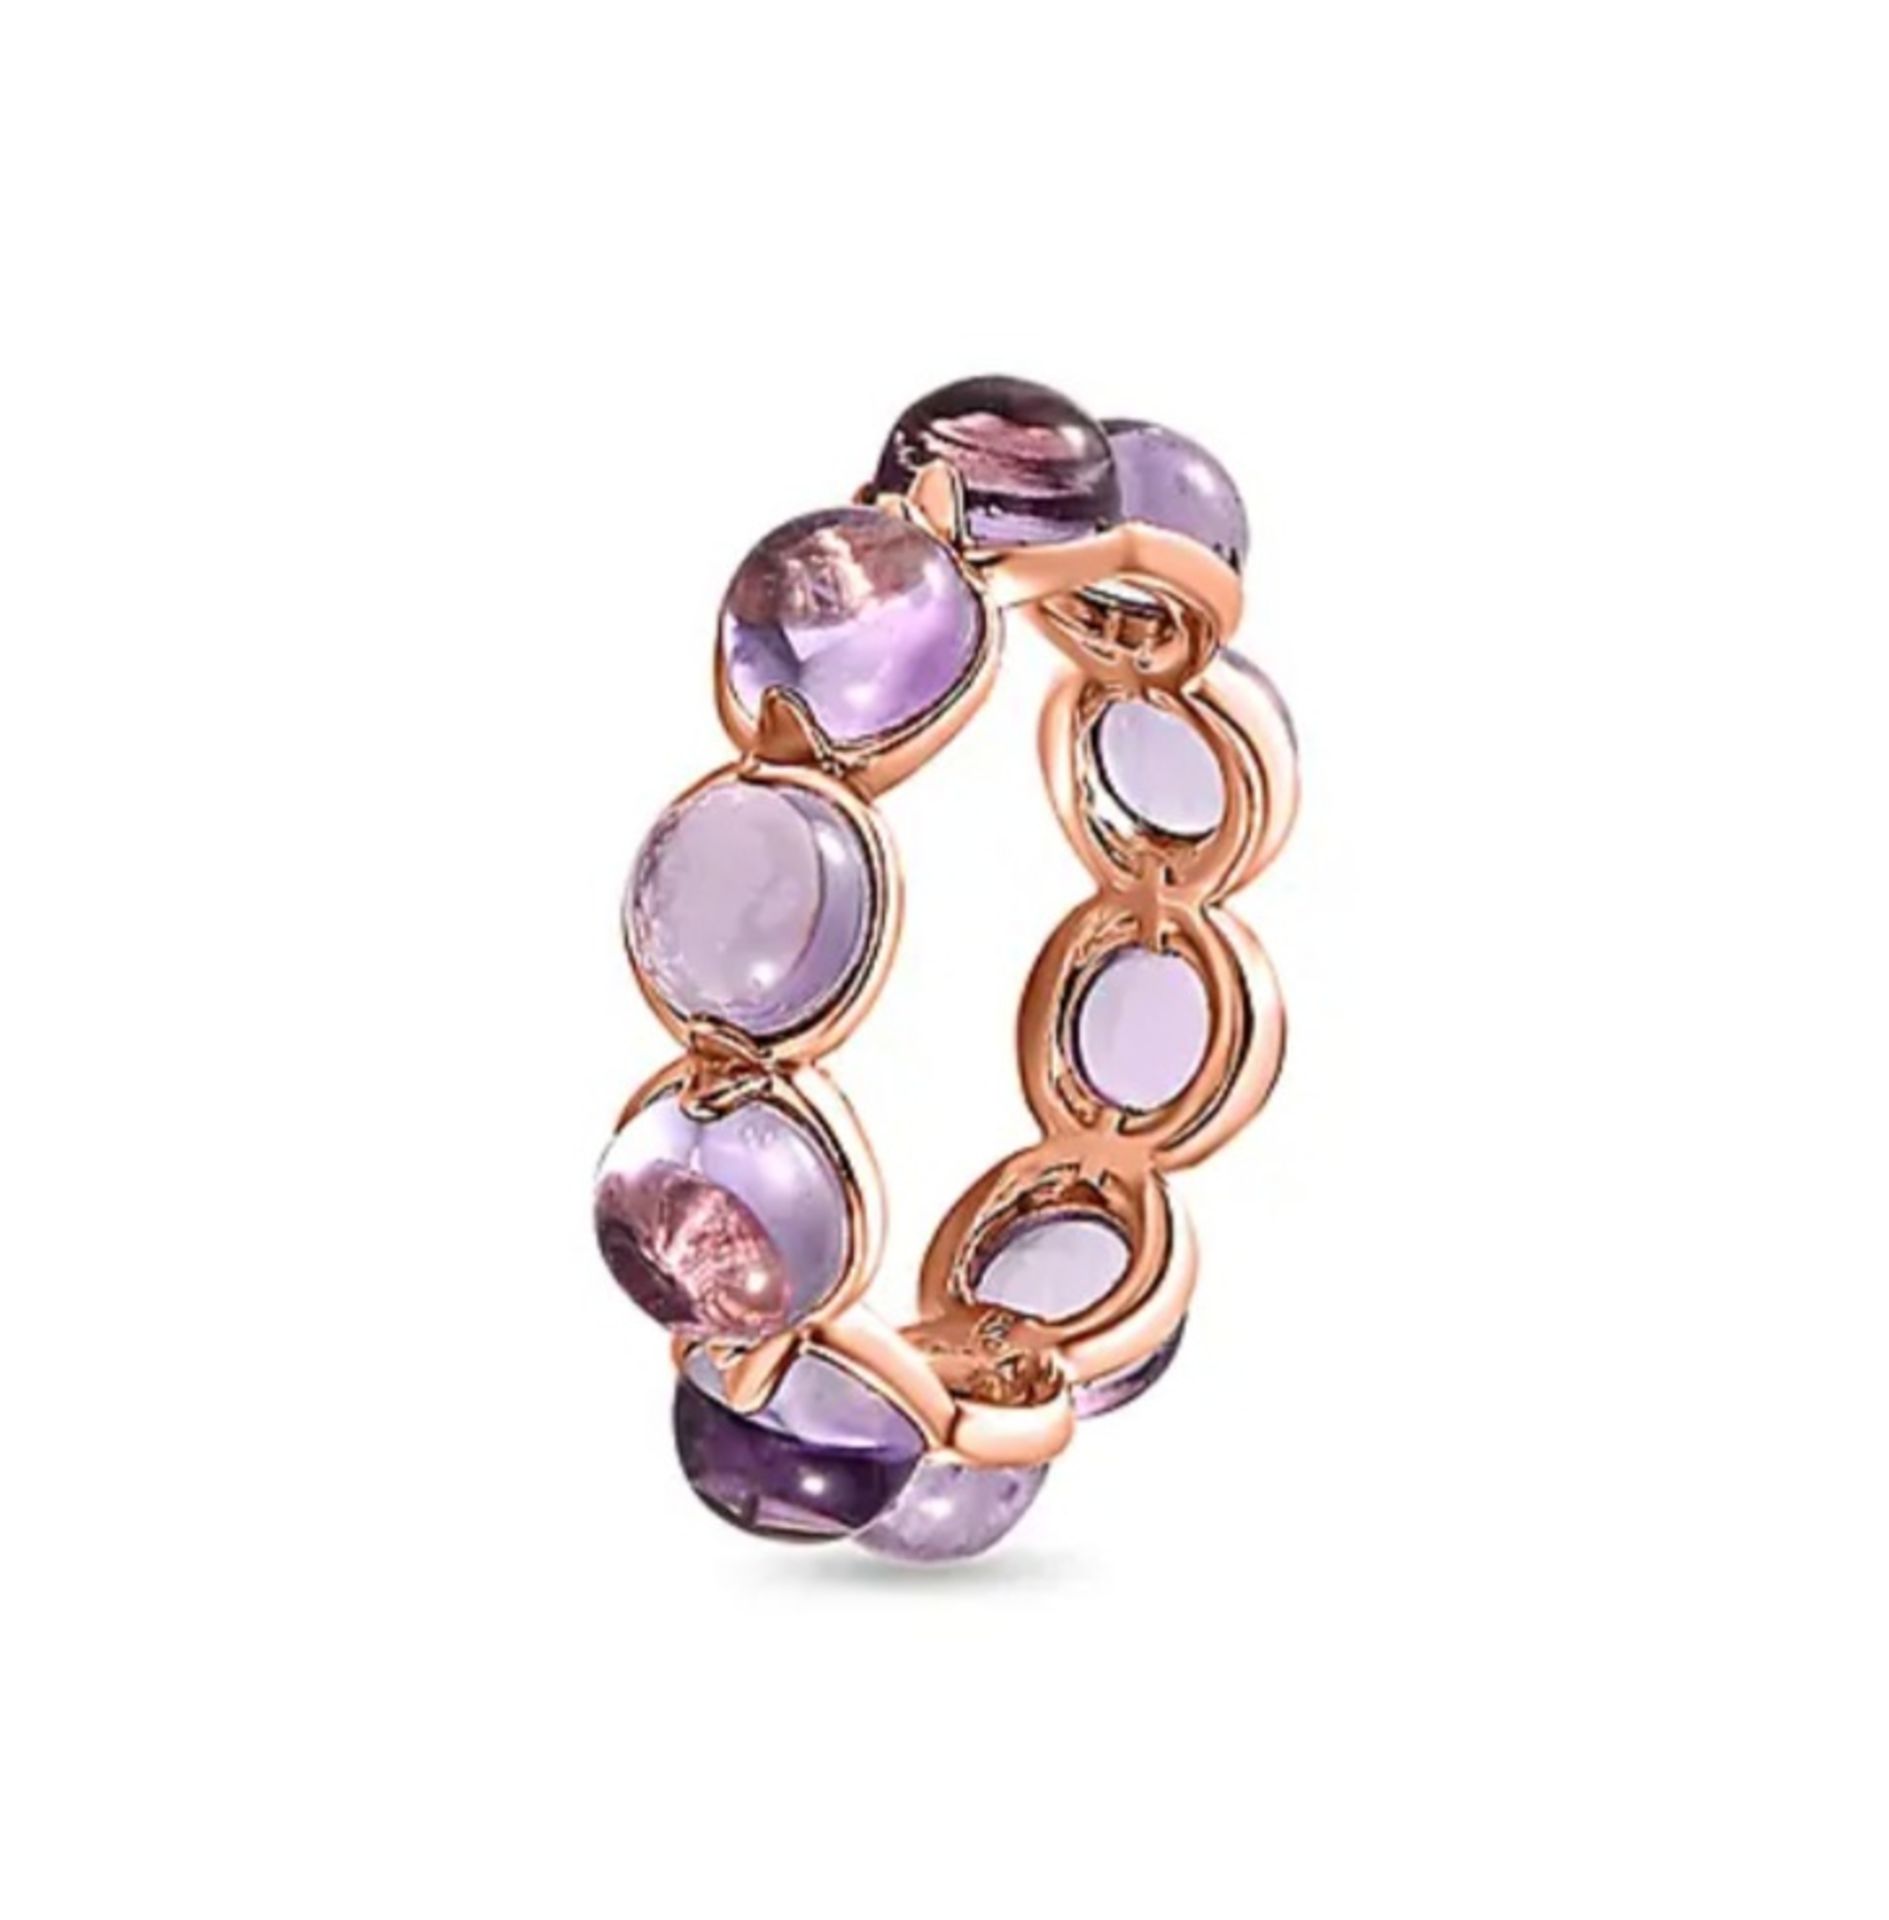 New! Pink Amethyst Band Ring In 18K Rose Gold Vermeil Plated Sterling Silver - Image 4 of 4